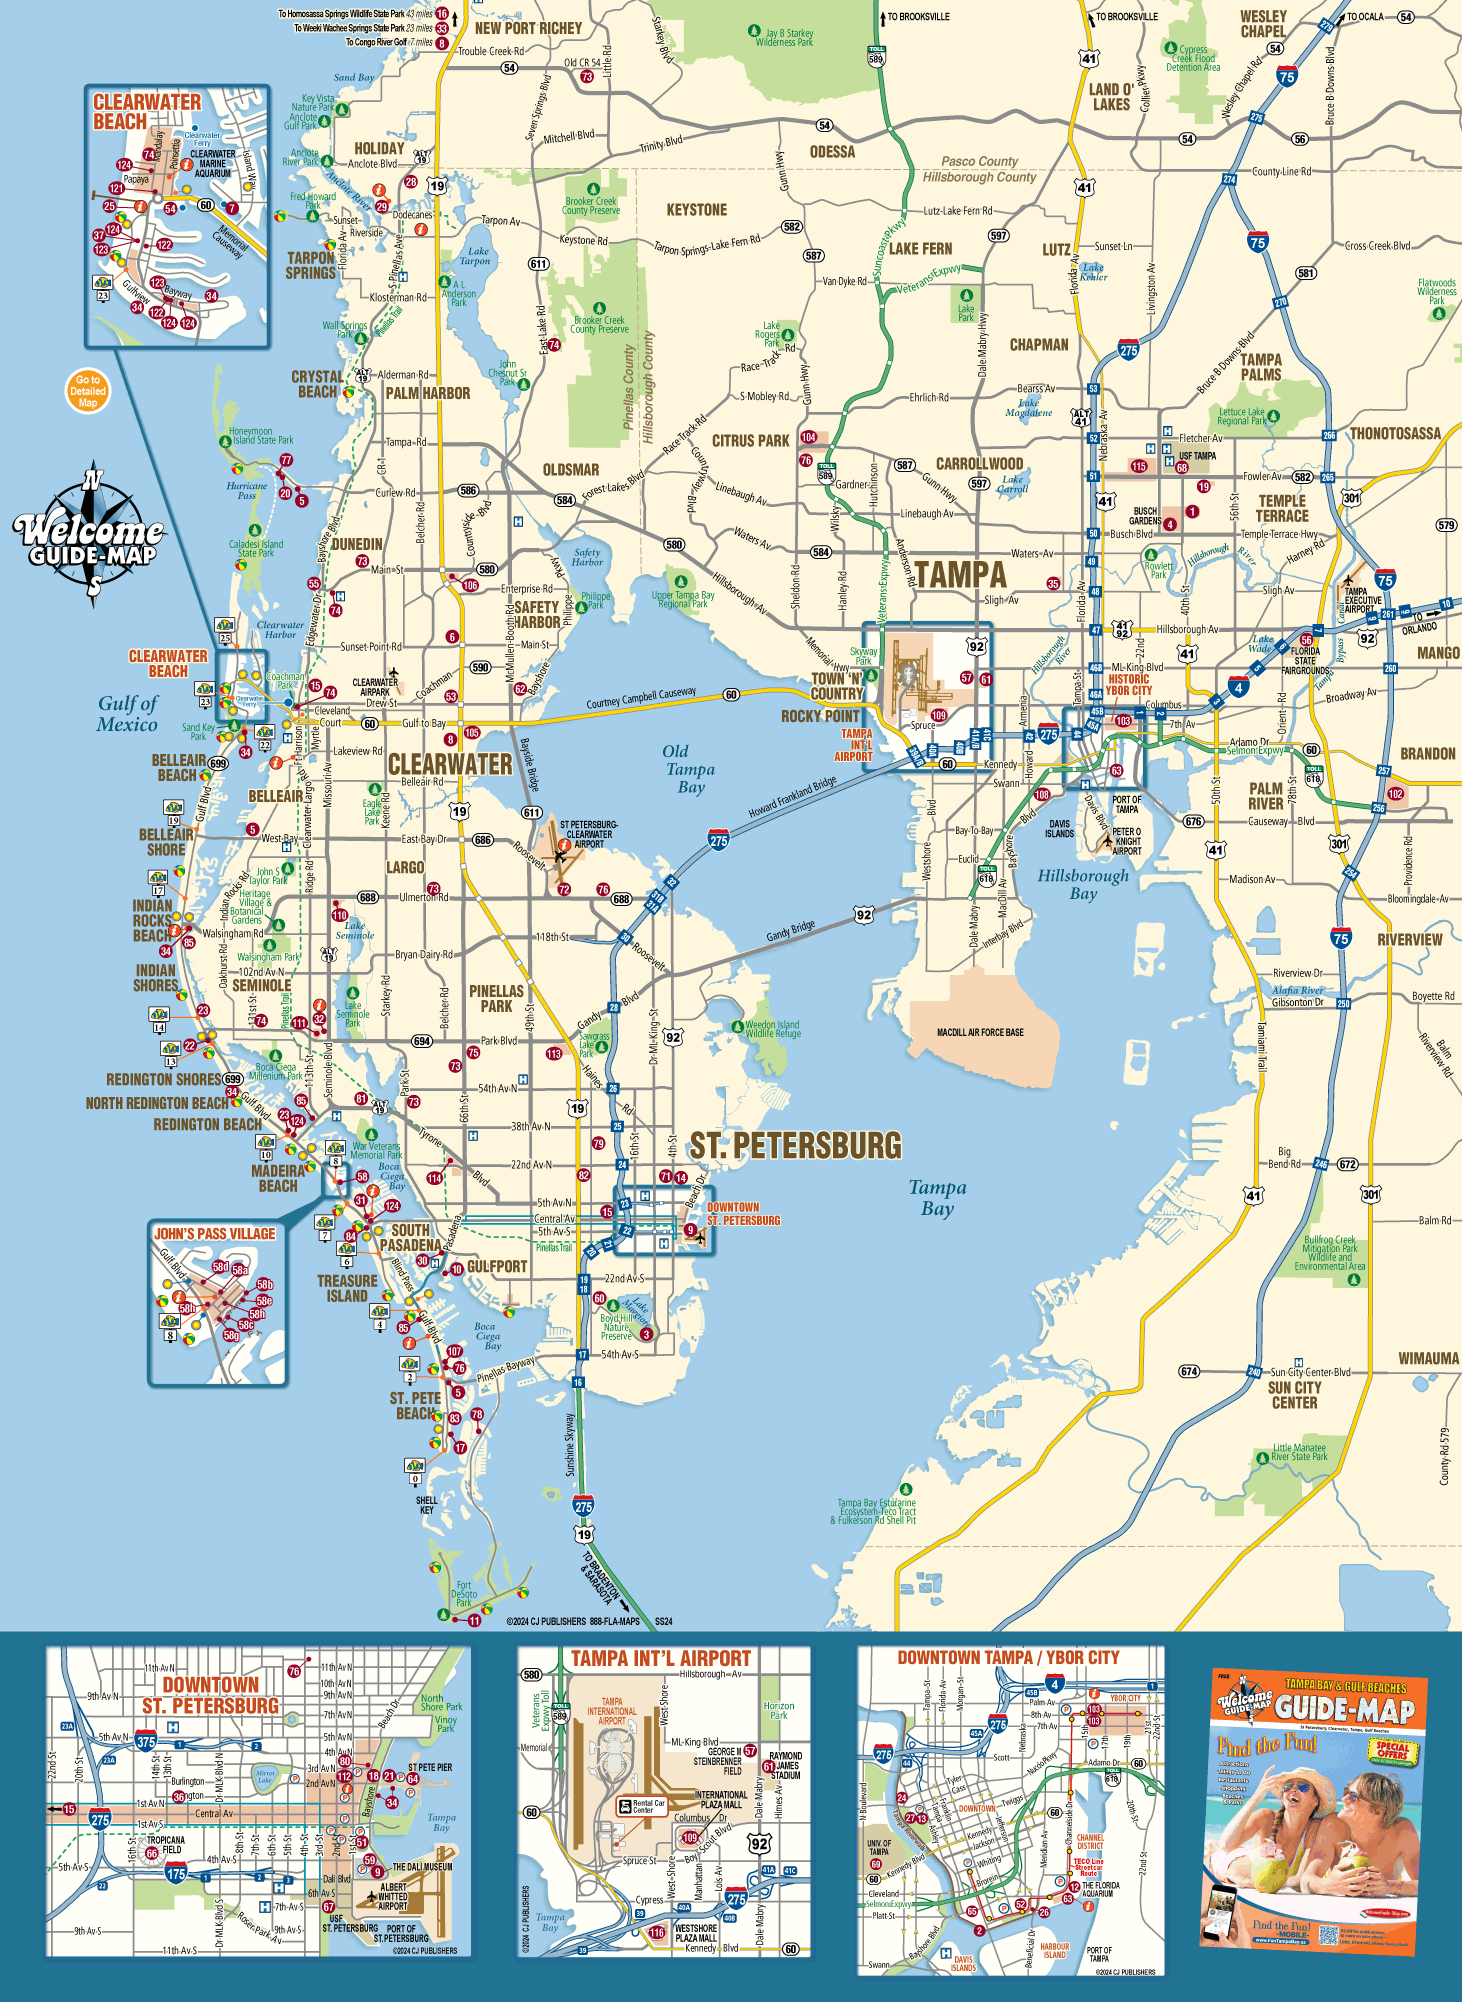 Map of Florida (USA) and inset map of Hillsborough County showing the